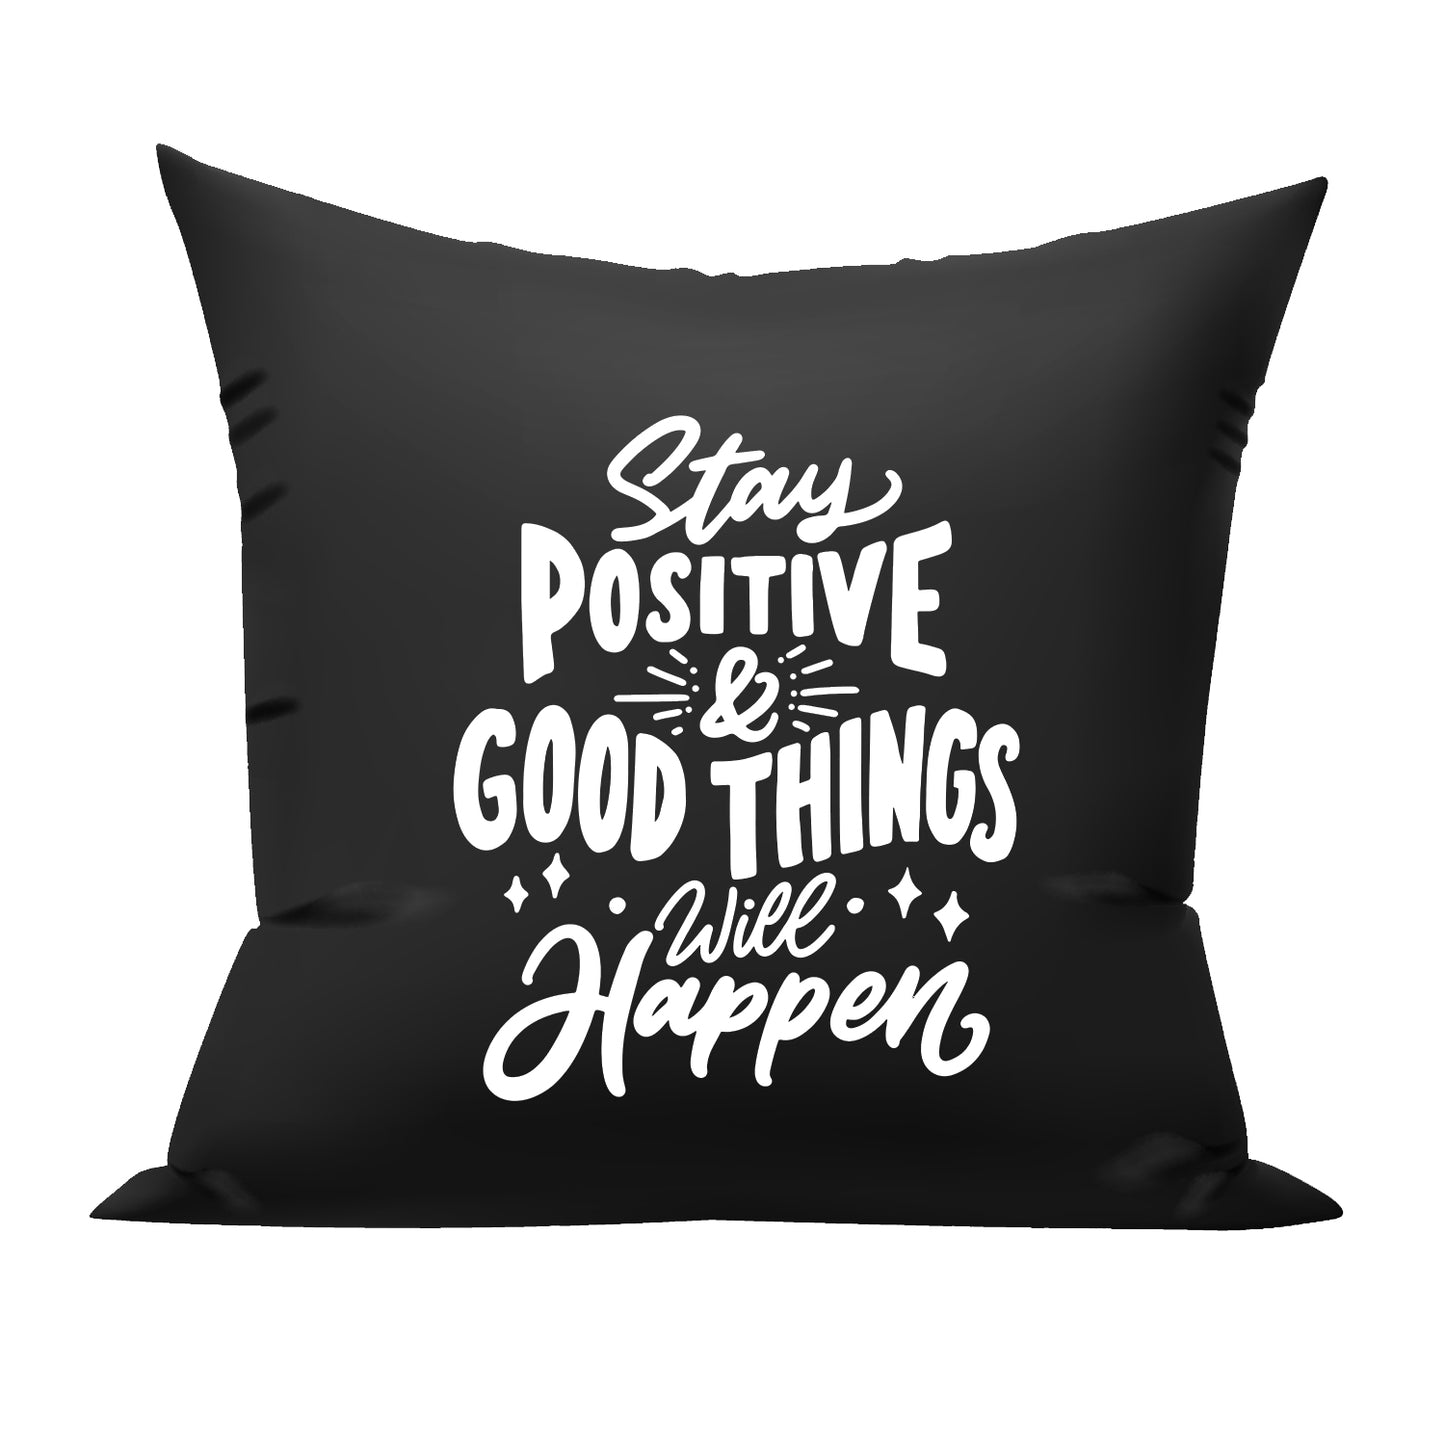 Stay Positive and Good Things will Happen cushion